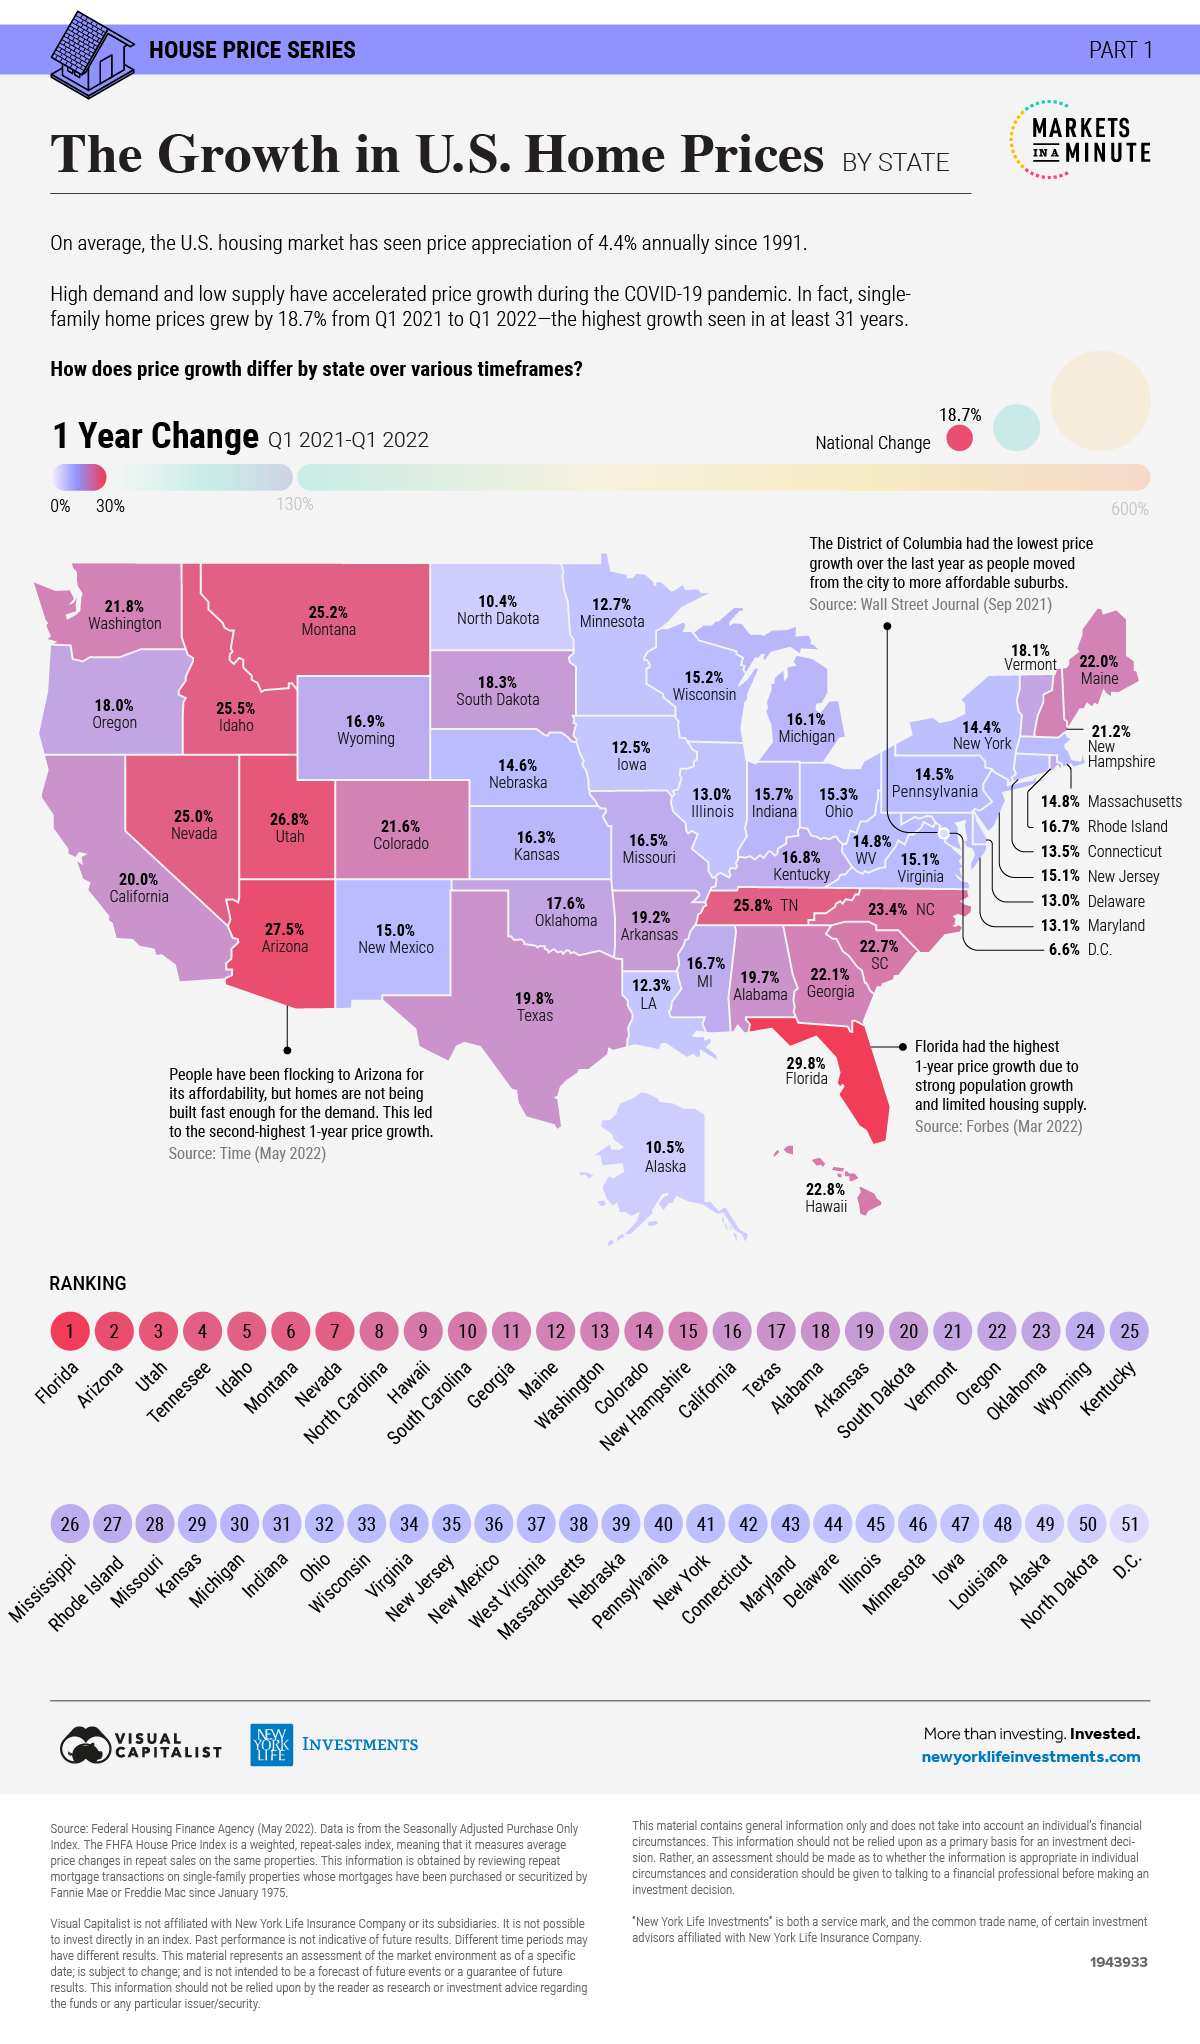 U.S. map with states colored according to the growth in house prices from Q1 2021 to Q1 2022. Florida had the highest growth.